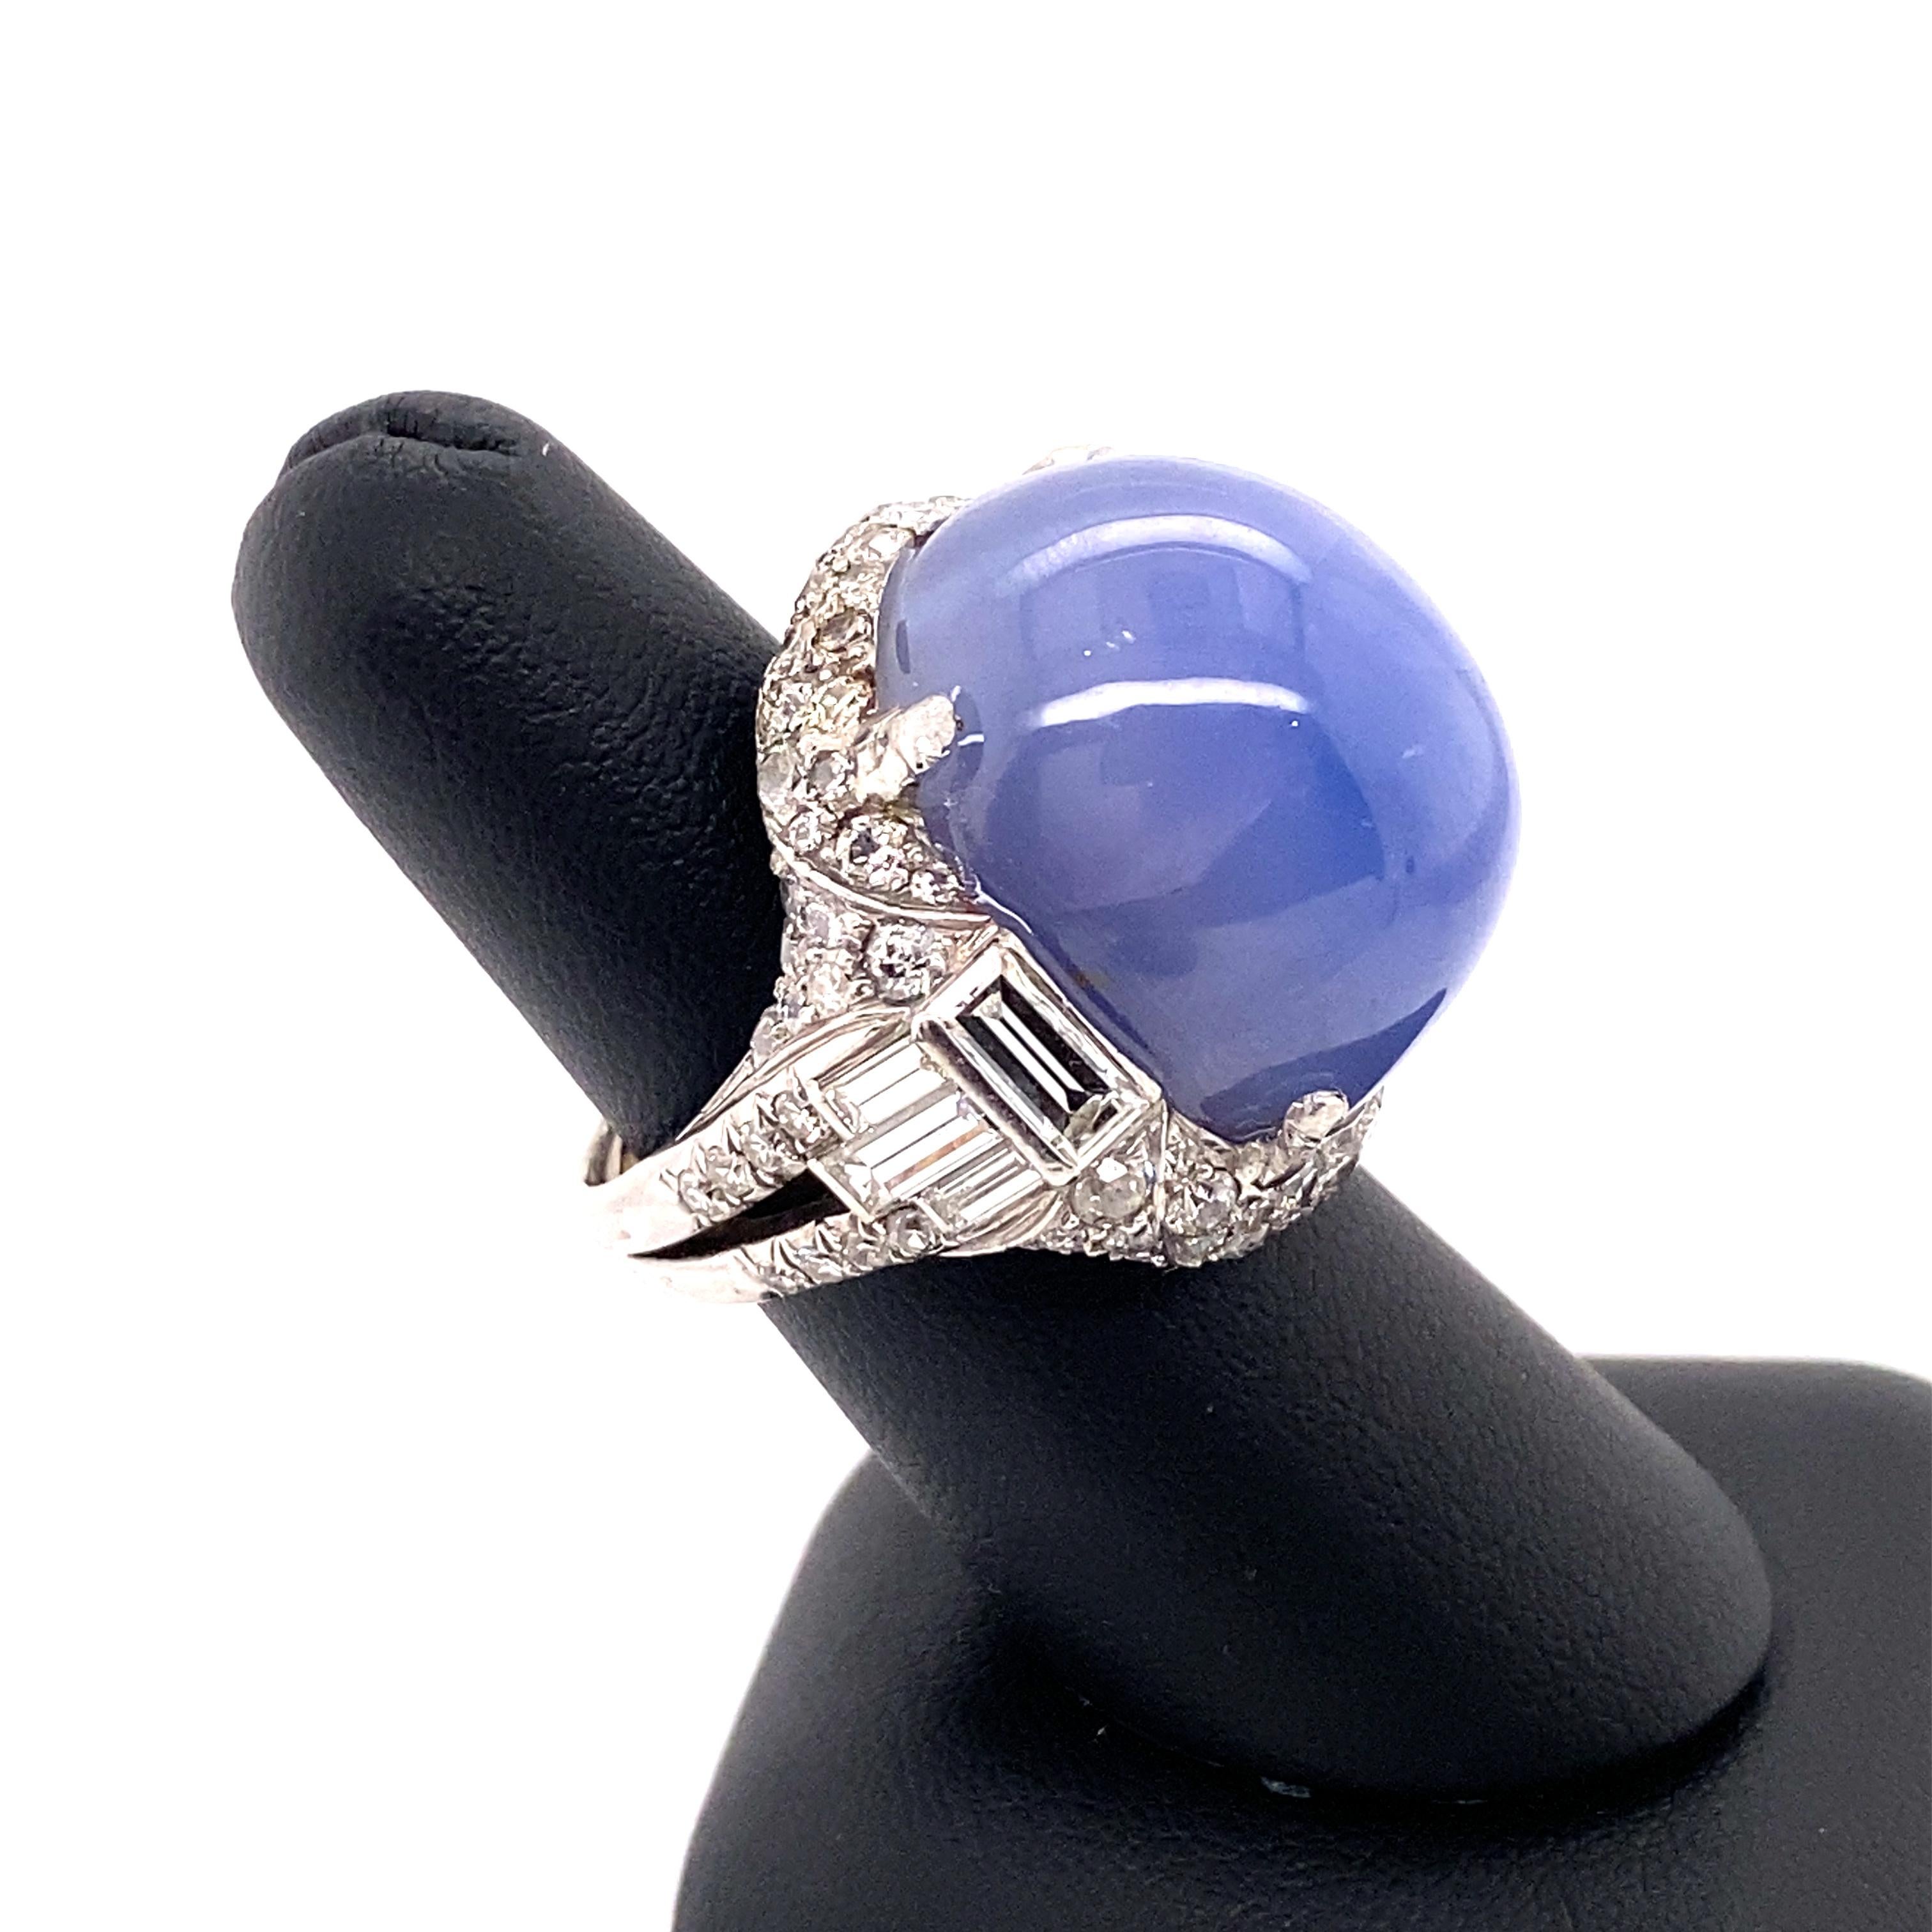 This show stopping ring features a huge 79.57-carat cabochon Ceylon unheated star sapphire which is accented by an incredible hand setting comprised of baguette, round brilliant and single-cut diamonds weighing a total of approximately 4.00